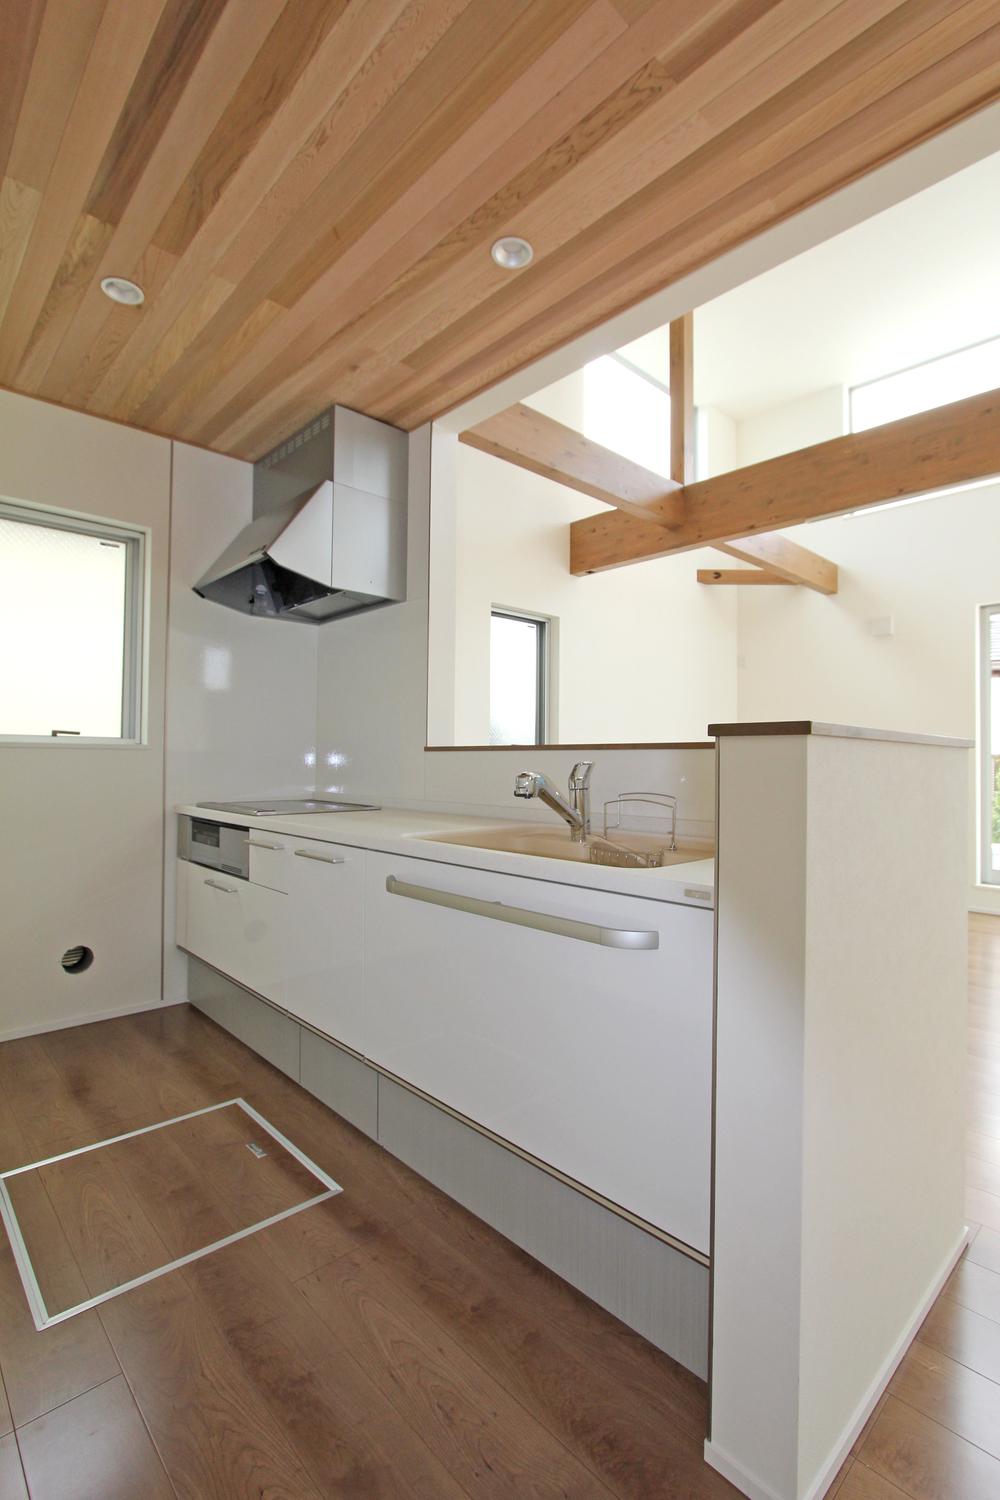 Same specifications photo (kitchen). Same house builders construction results